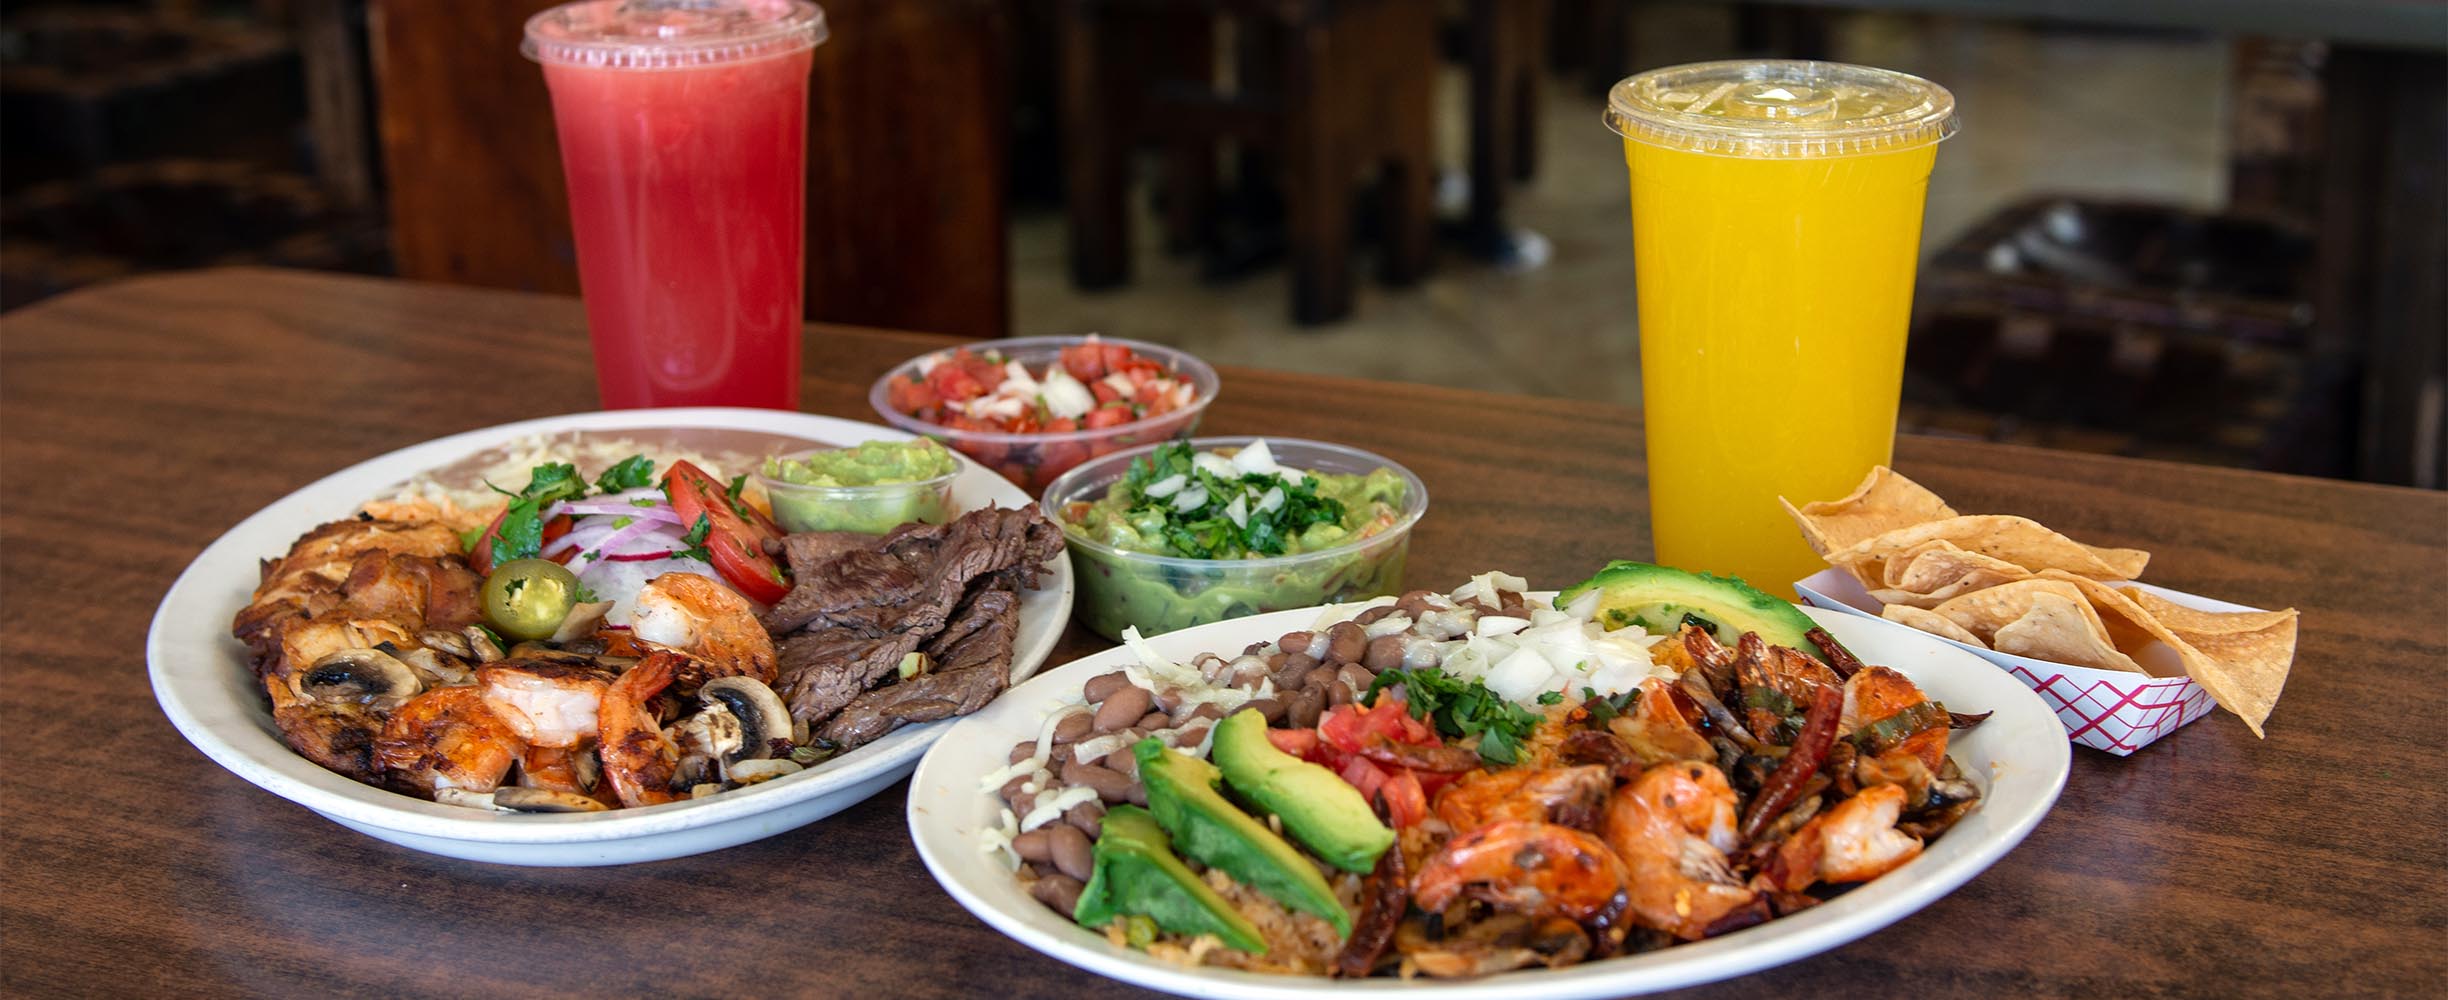 Our Mexican Food is authentic, every dish id created as true Mexican Food.